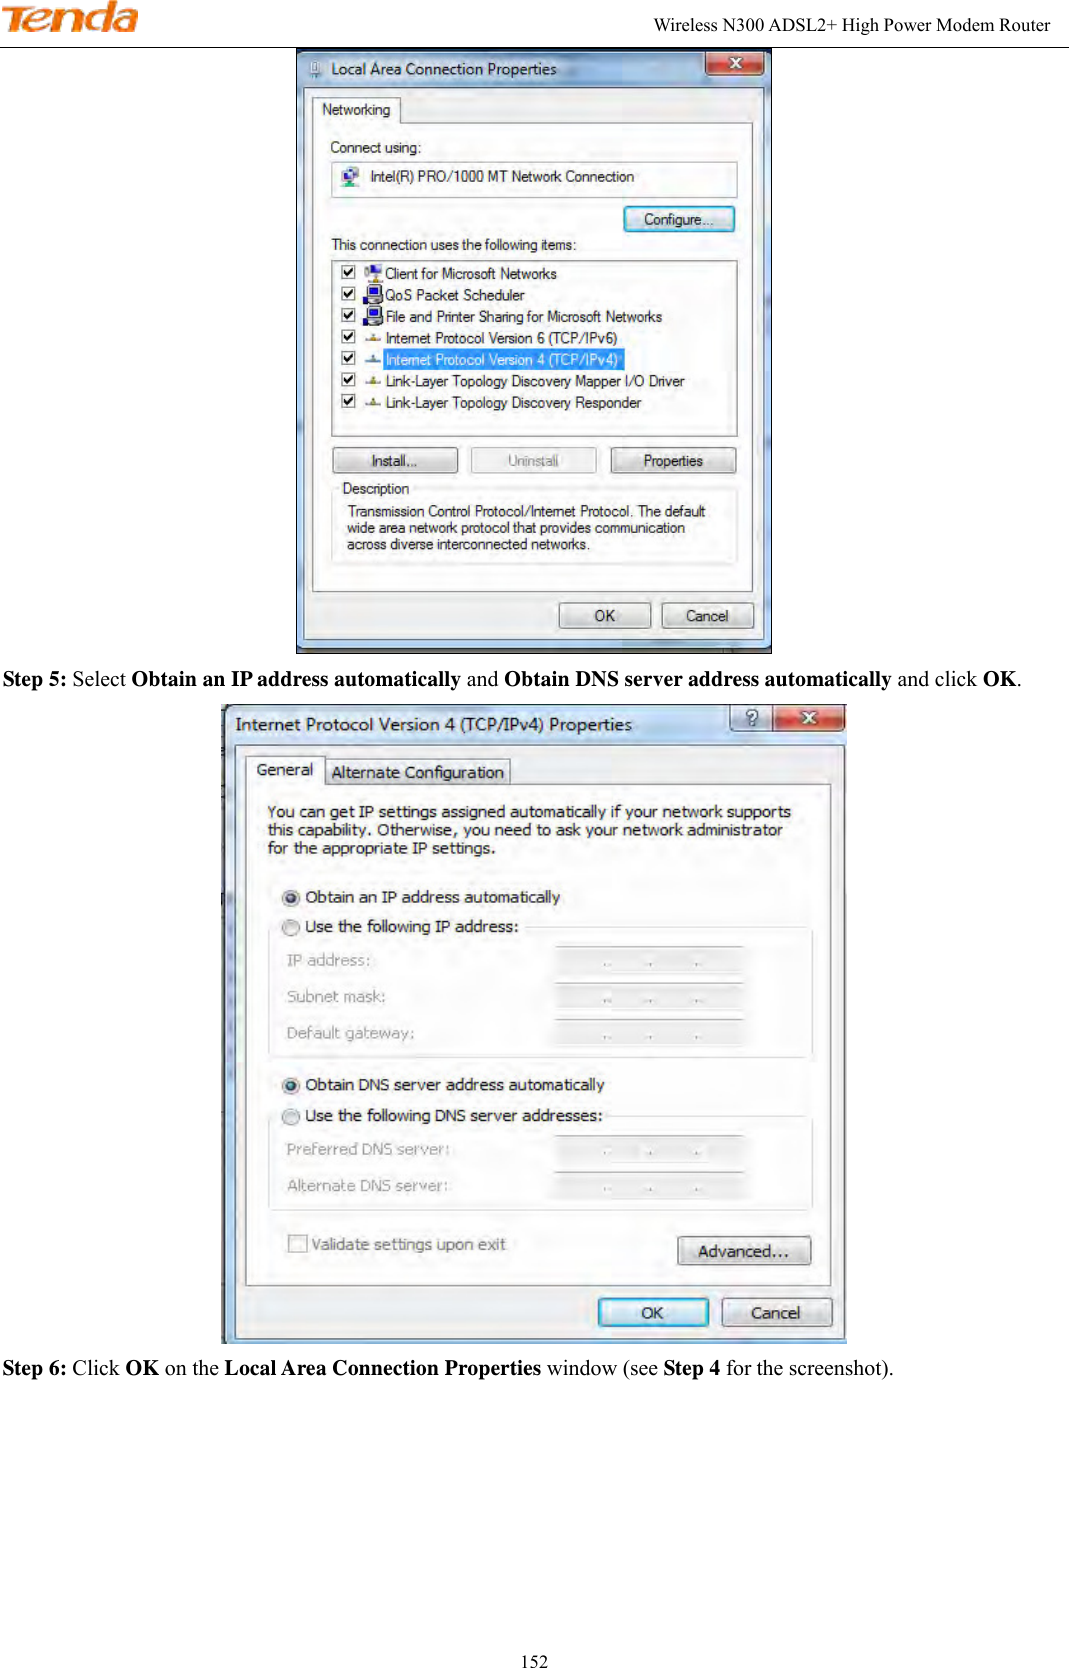                                                                                                               Wireless N300 ADSL2+ High Power Modem Router 152  Step 5: Select Obtain an IP address automatically and Obtain DNS server address automatically and click OK.  Step 6: Click OK on the Local Area Connection Properties window (see Step 4 for the screenshot).       